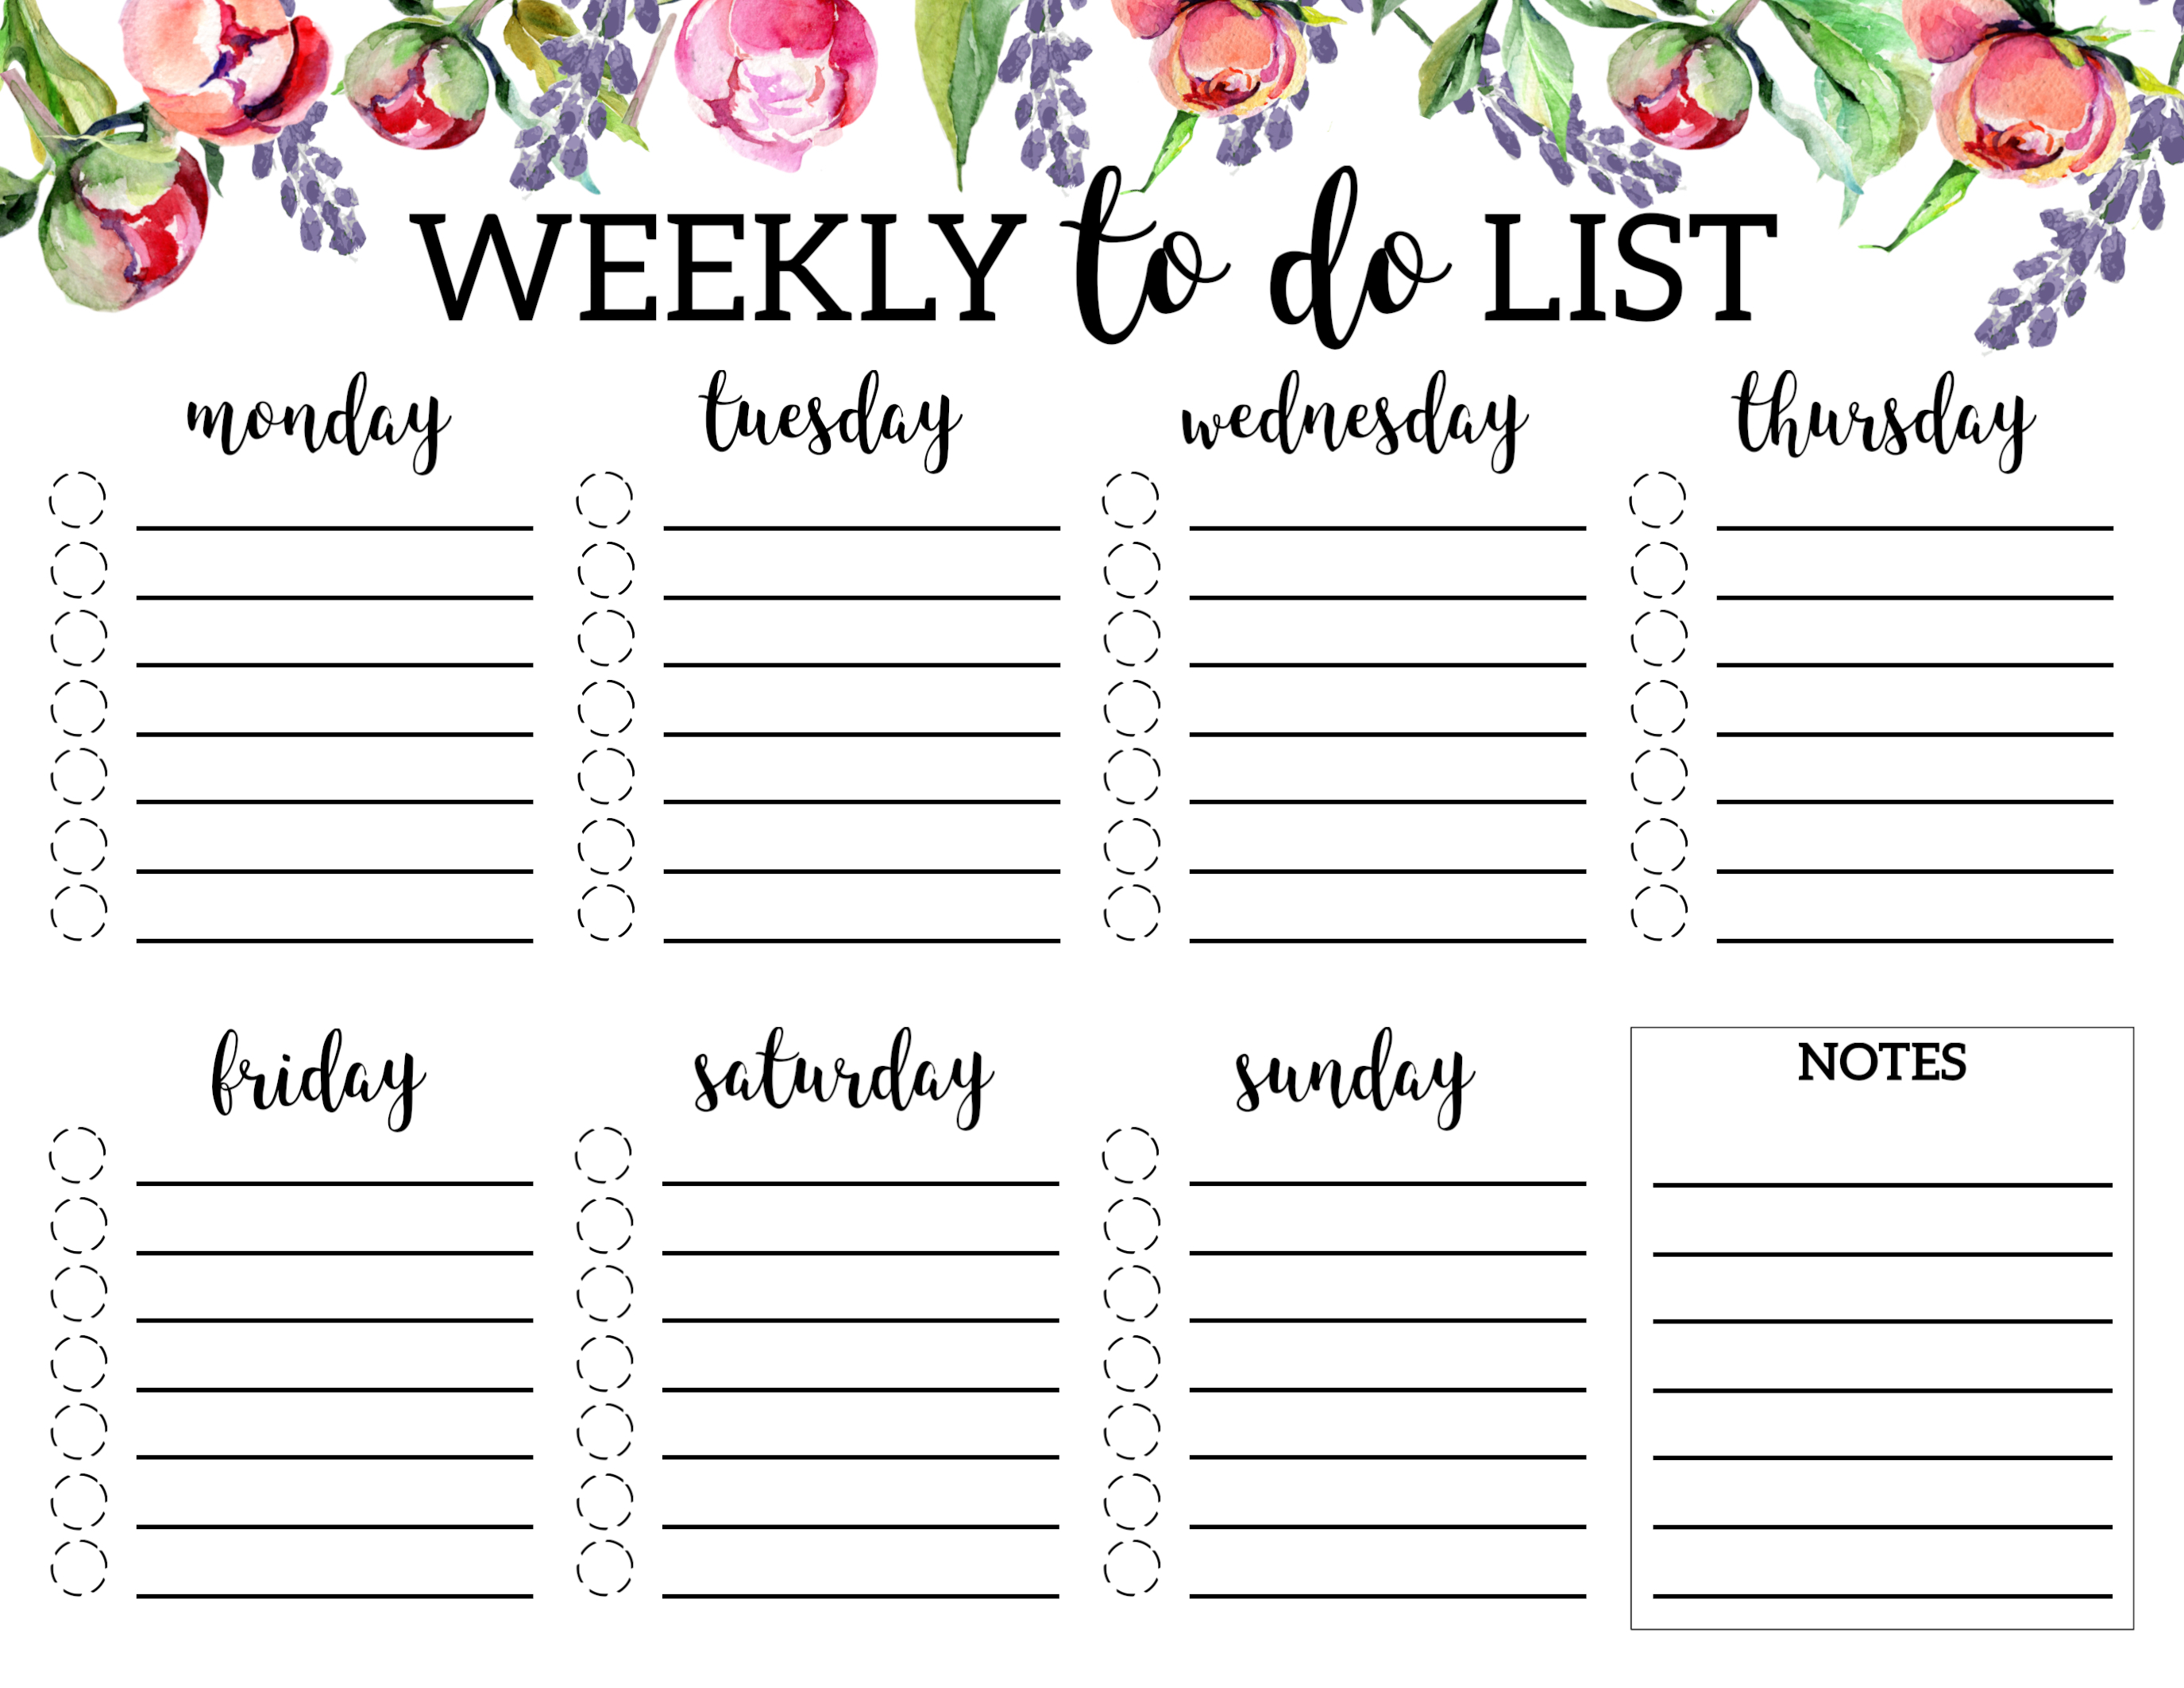 floral-weekly-to-do-list-printable-checklist-template-paper-trail-design